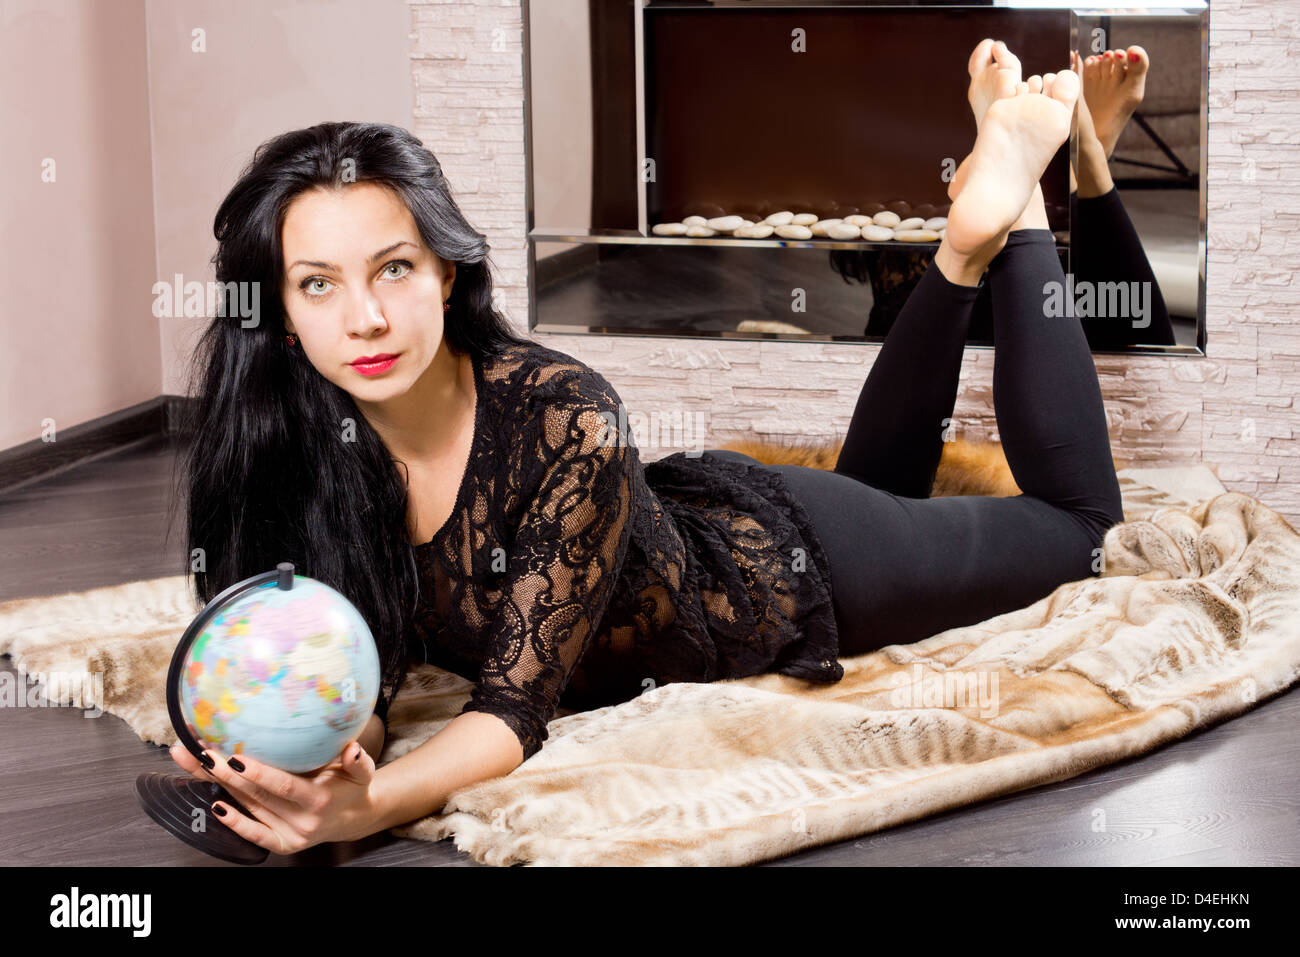 Beautiful woman planning a trip lying barefoot on a fur coat on the floor clutching a globe in her hands Stock Photo